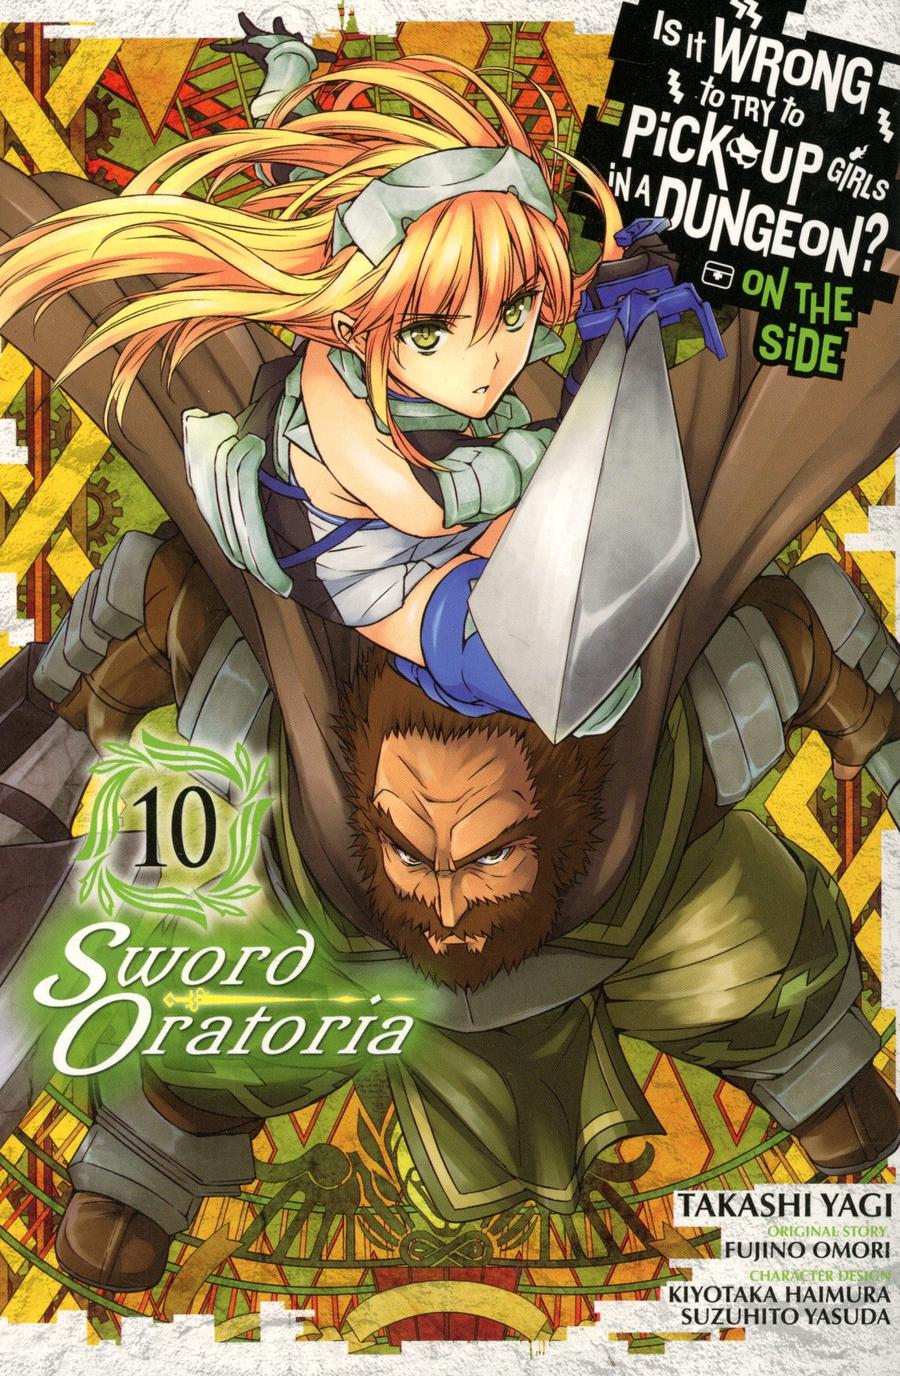 Is It Wrong To Try To Pick Up Girls In A Dungeon On The Side Sword Oratoria Vol 10 GN